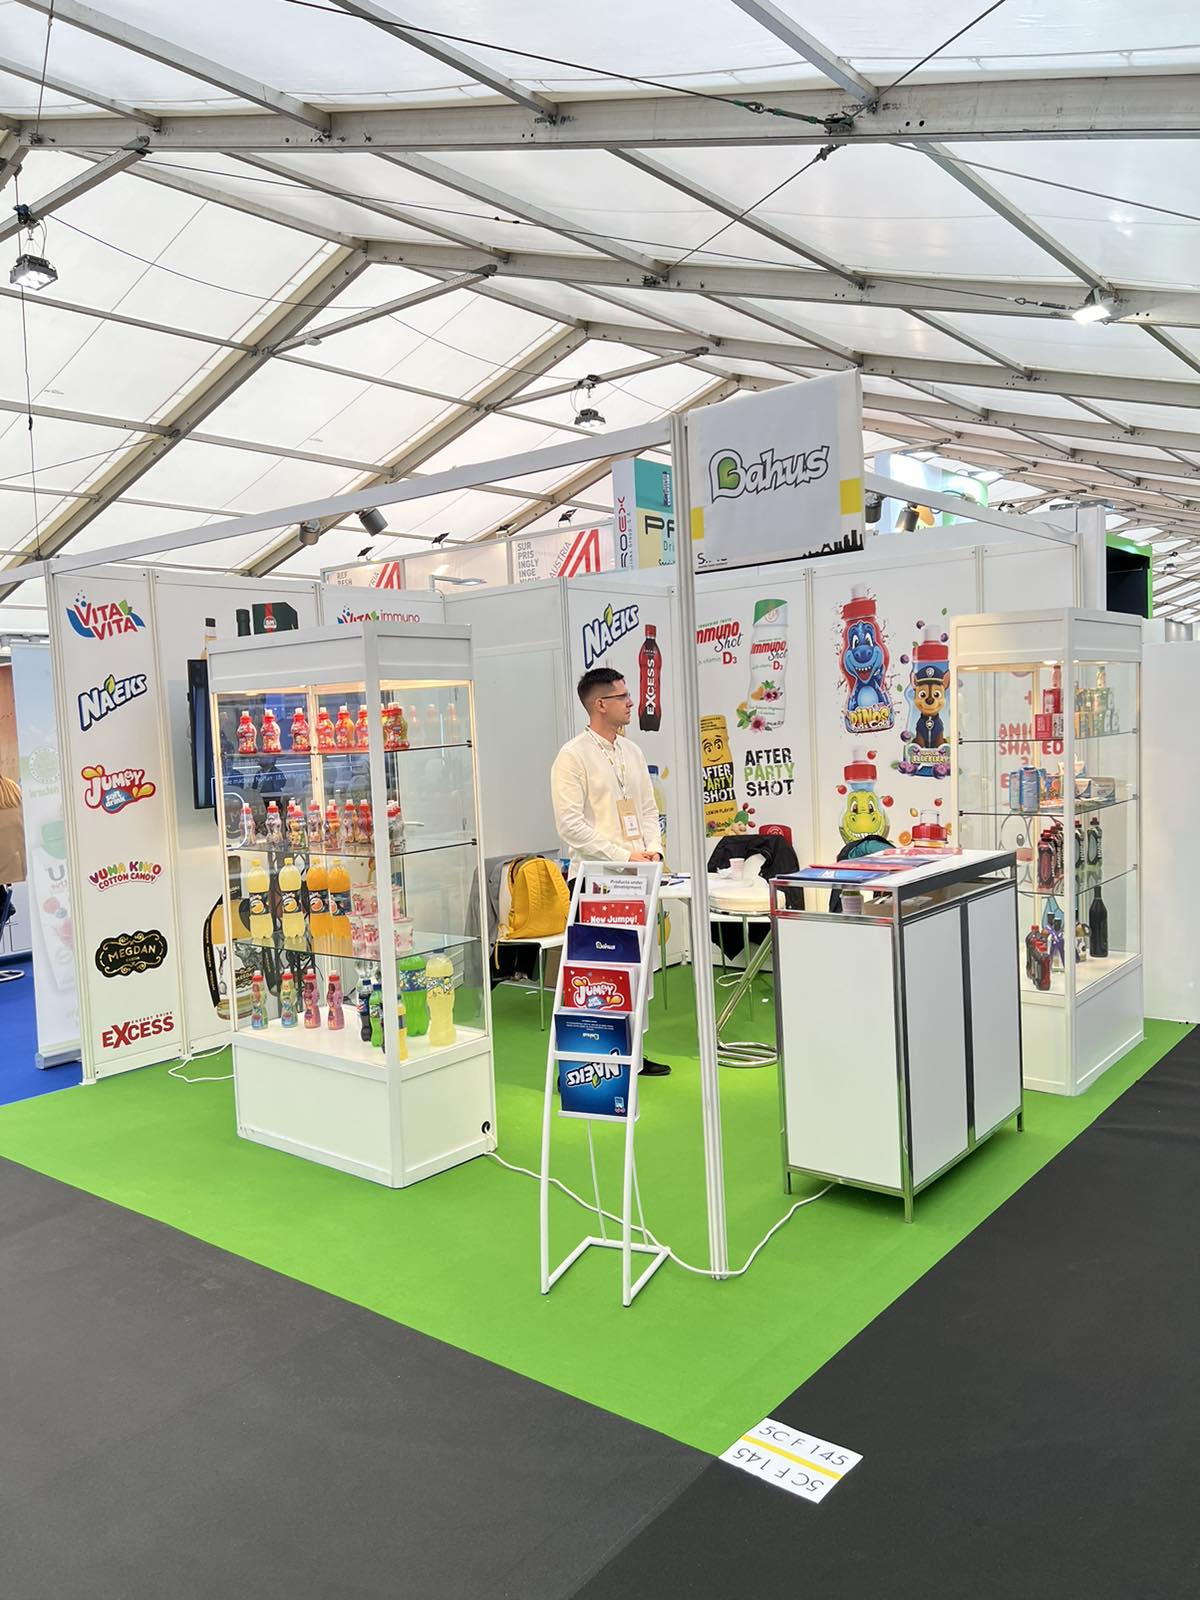 THE BAHUS COMPANY AT THE SIAL 2022 FAIR IN PARIS